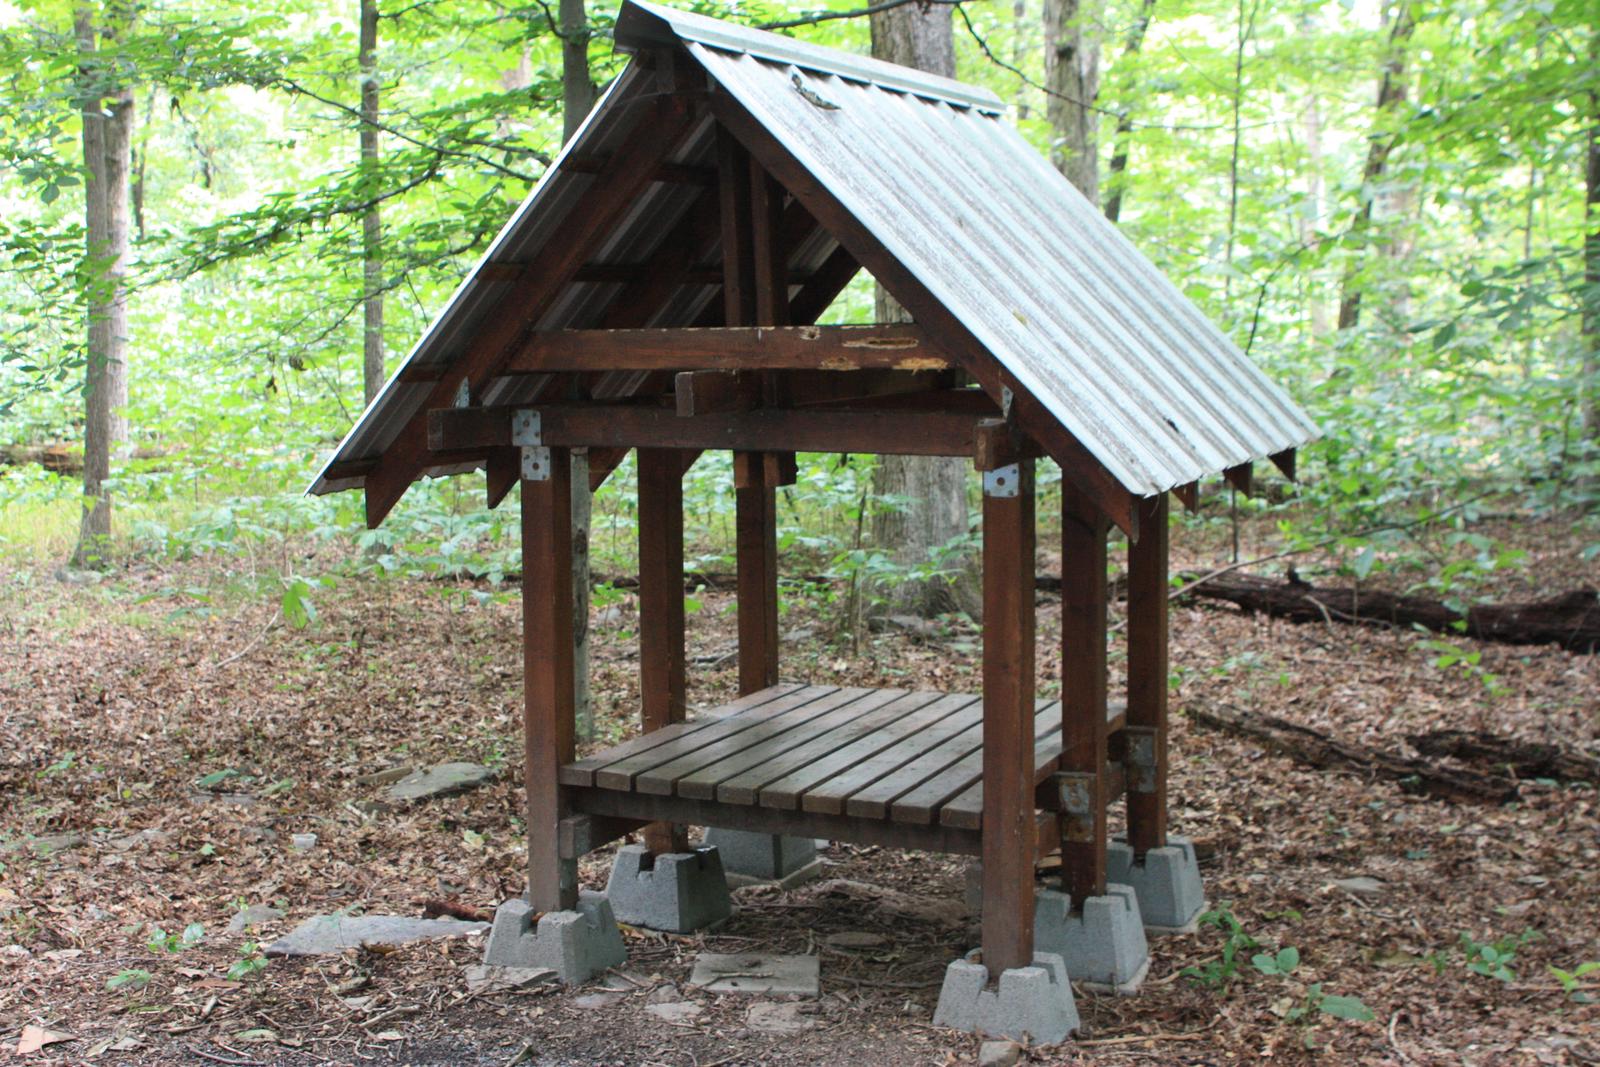 Wood ShedSmall Shed with metal roof for firewood